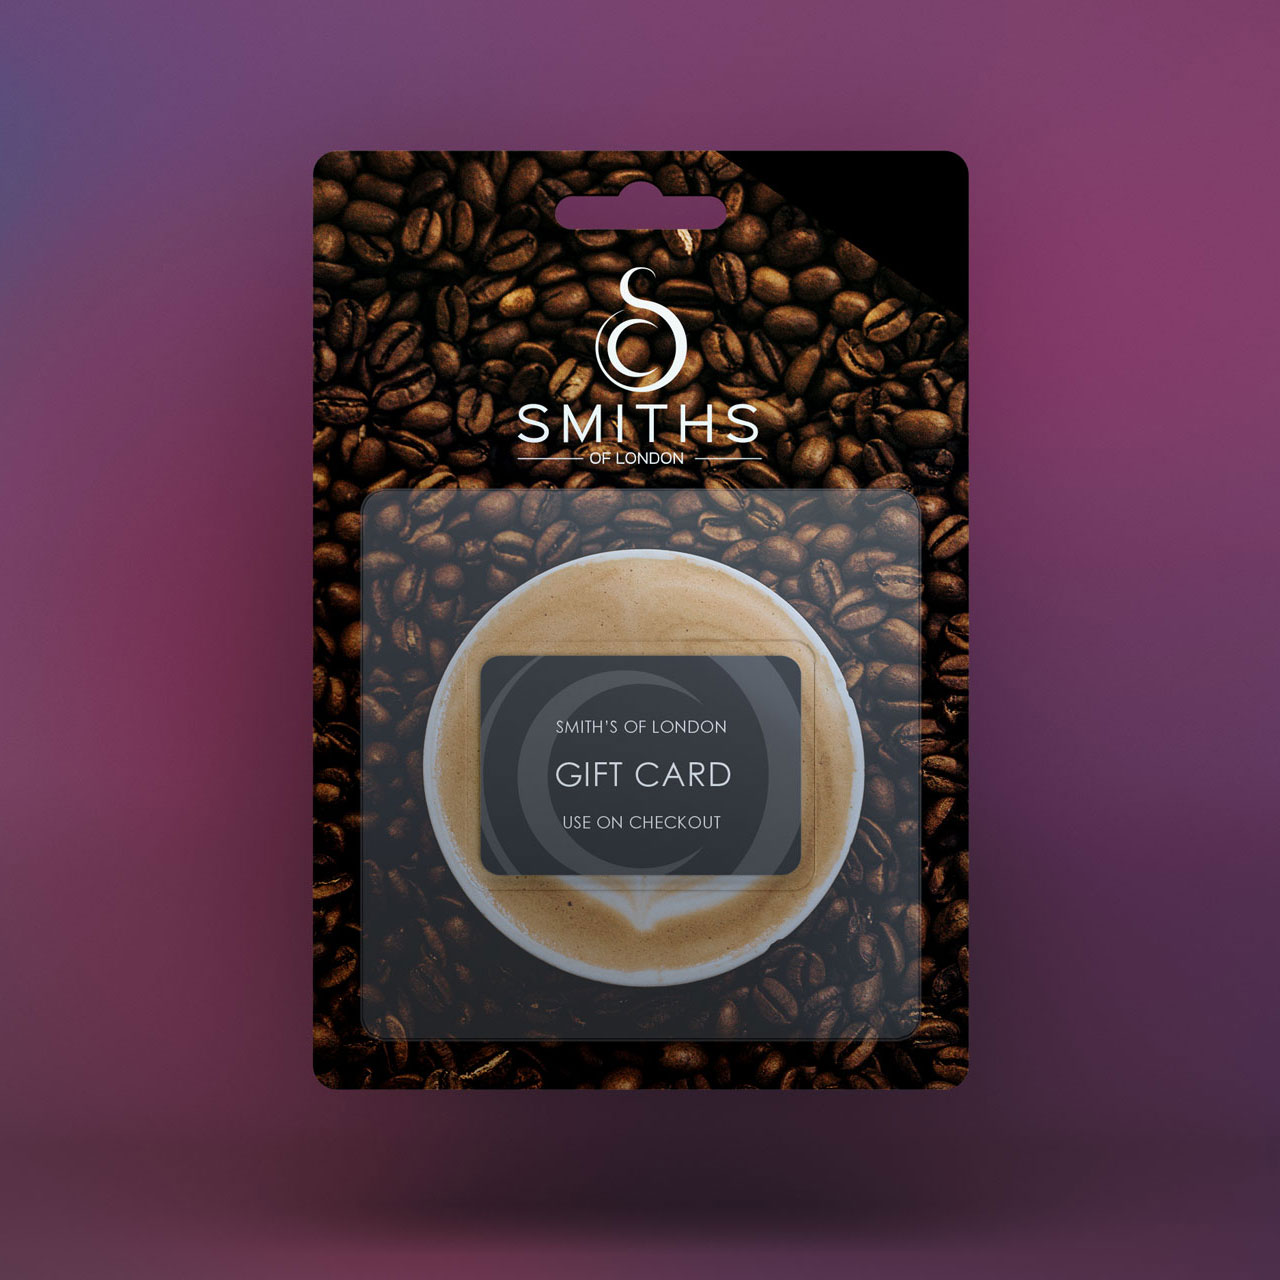 2021 Gift Card, Smith's of London